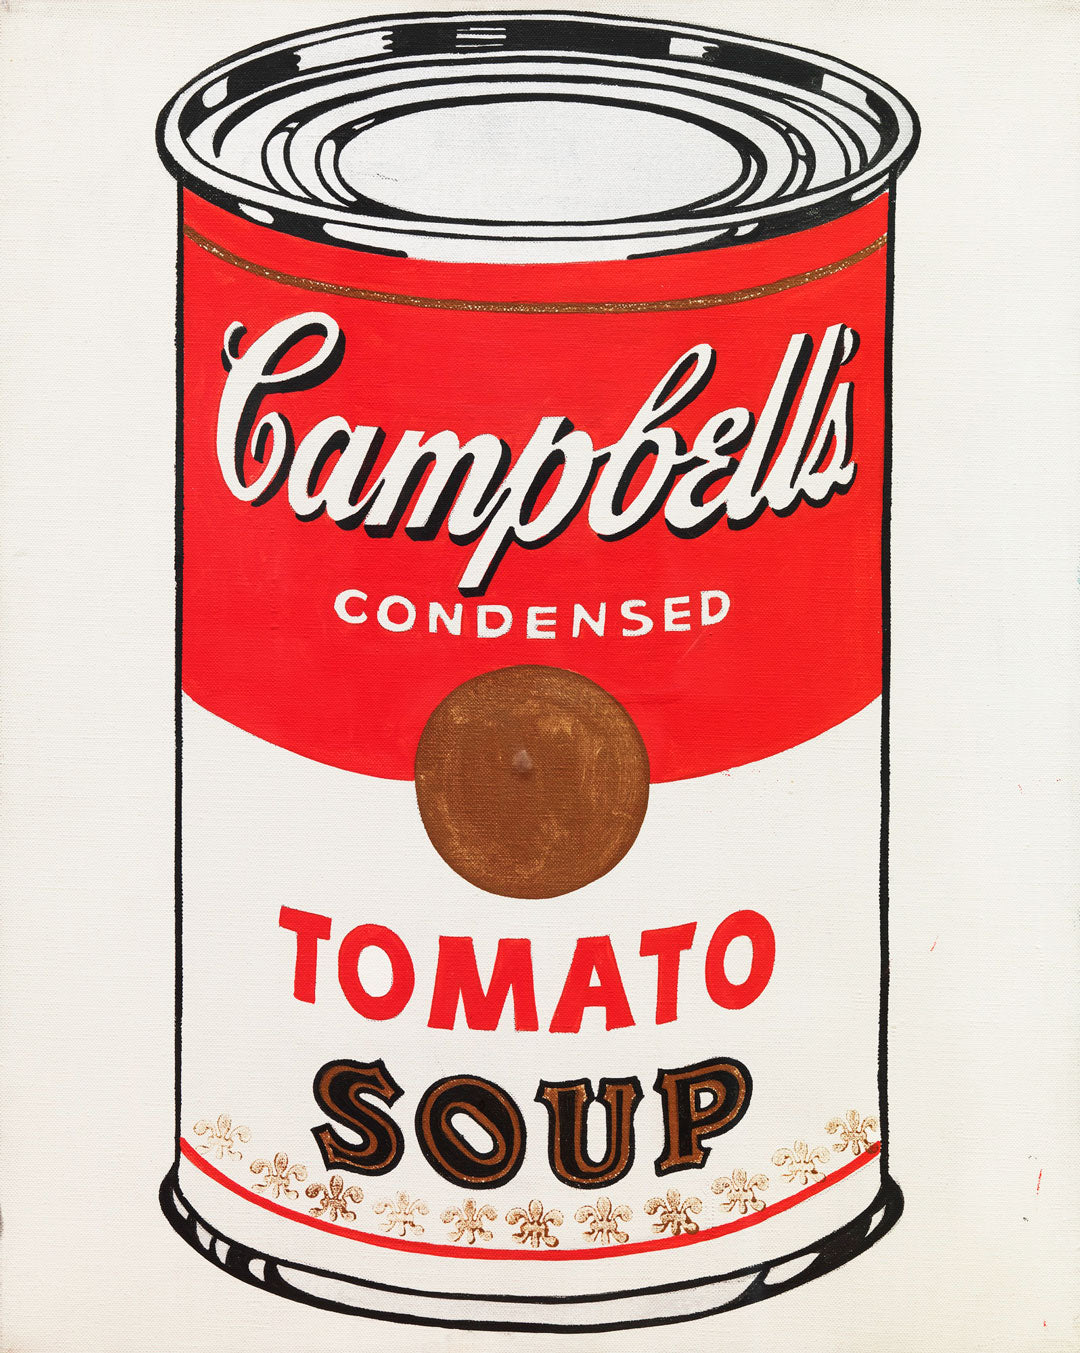 Campbells soup can painting by Andy Warhol